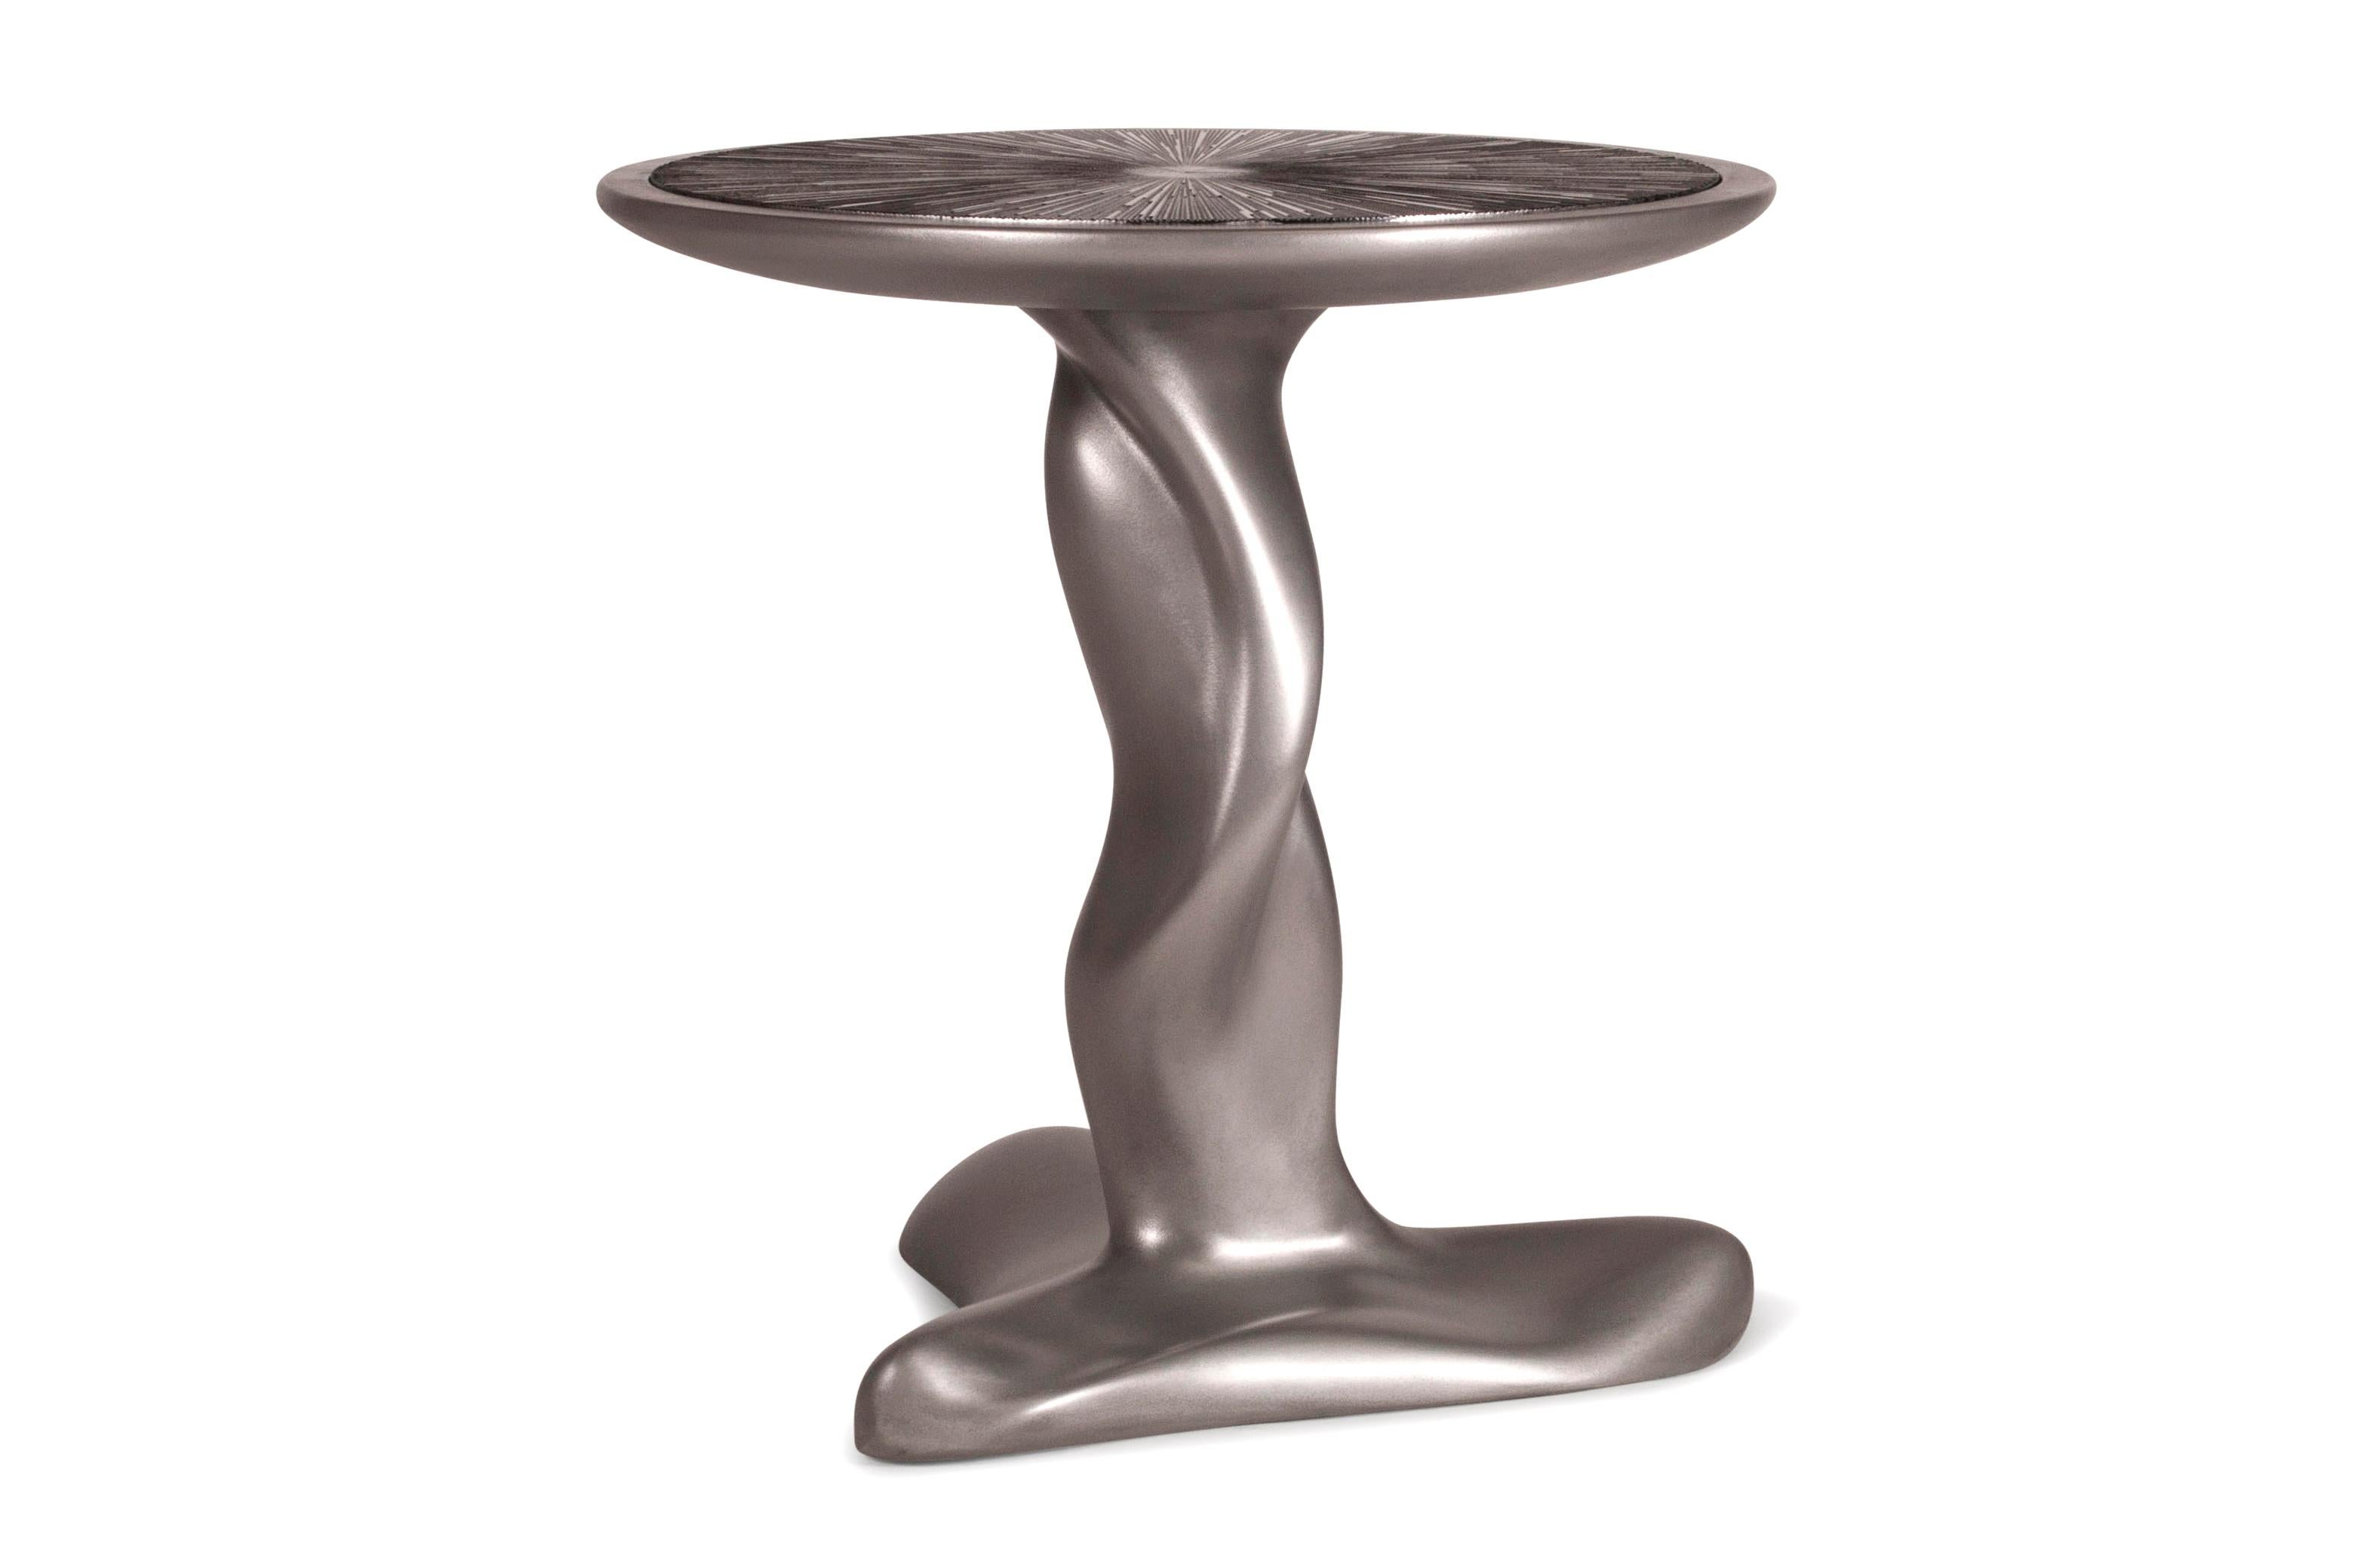 Helios side table is polished stainless steel finish from our unique metal finish. The top is lacquered black with silver leaf gilding. Custom finish and sized available.

About Amorph: 
Amorph is a design and manufacturing company based in Los